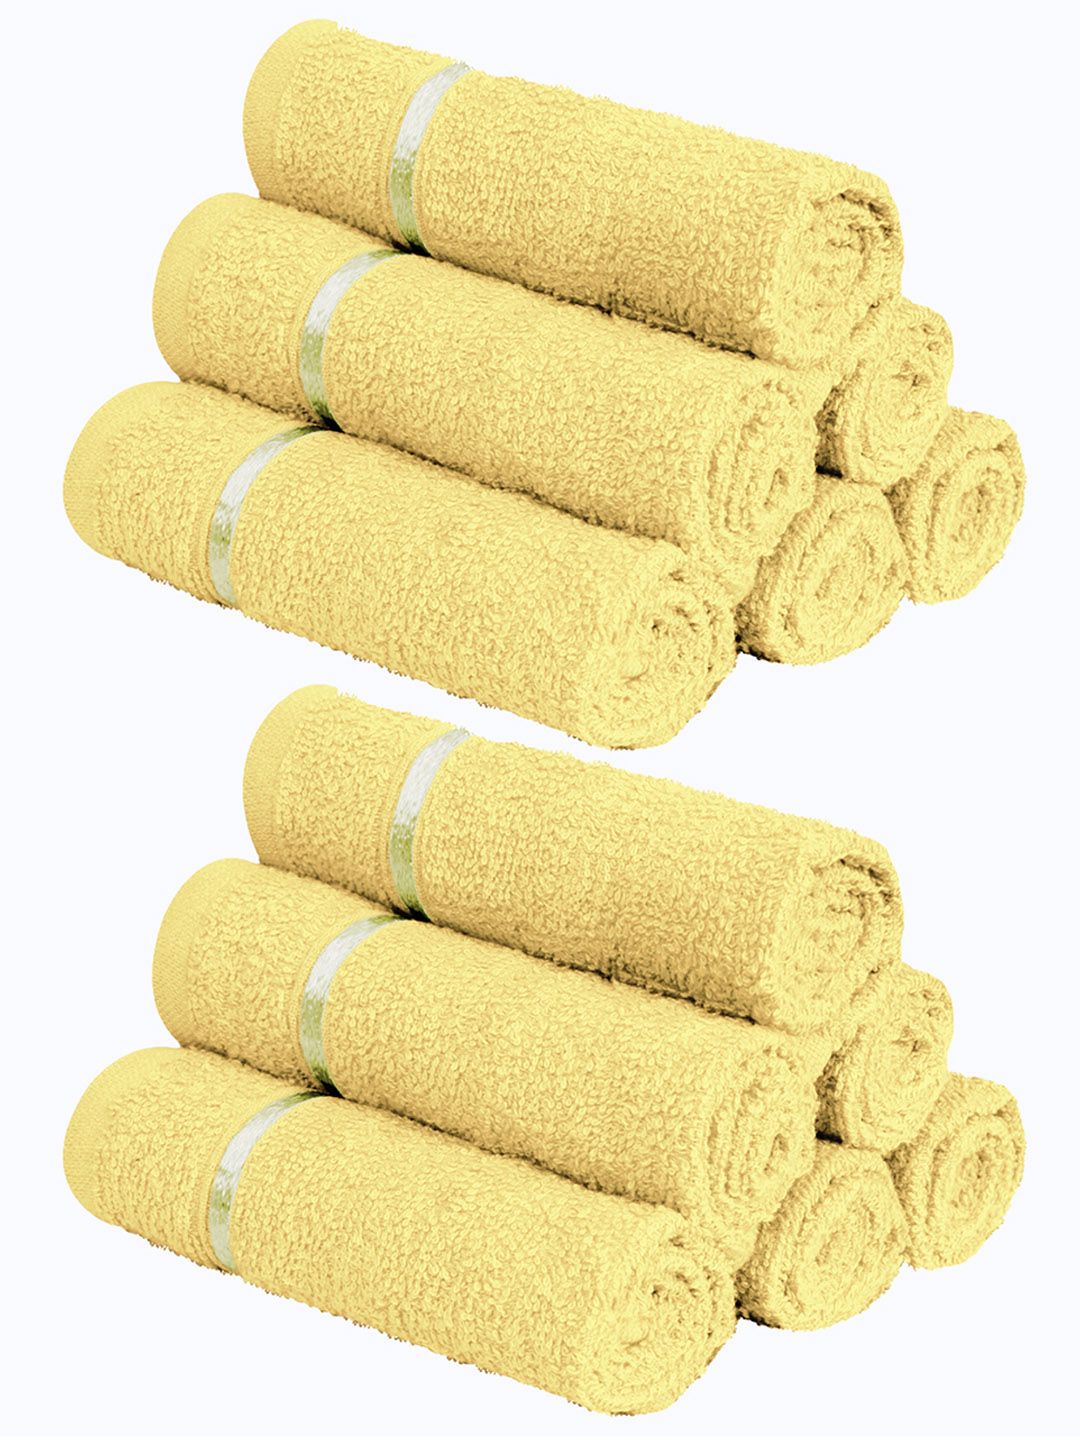 Story@home Unisex Yellow Cotton 450 GSM Set of 12 Towels Price in India